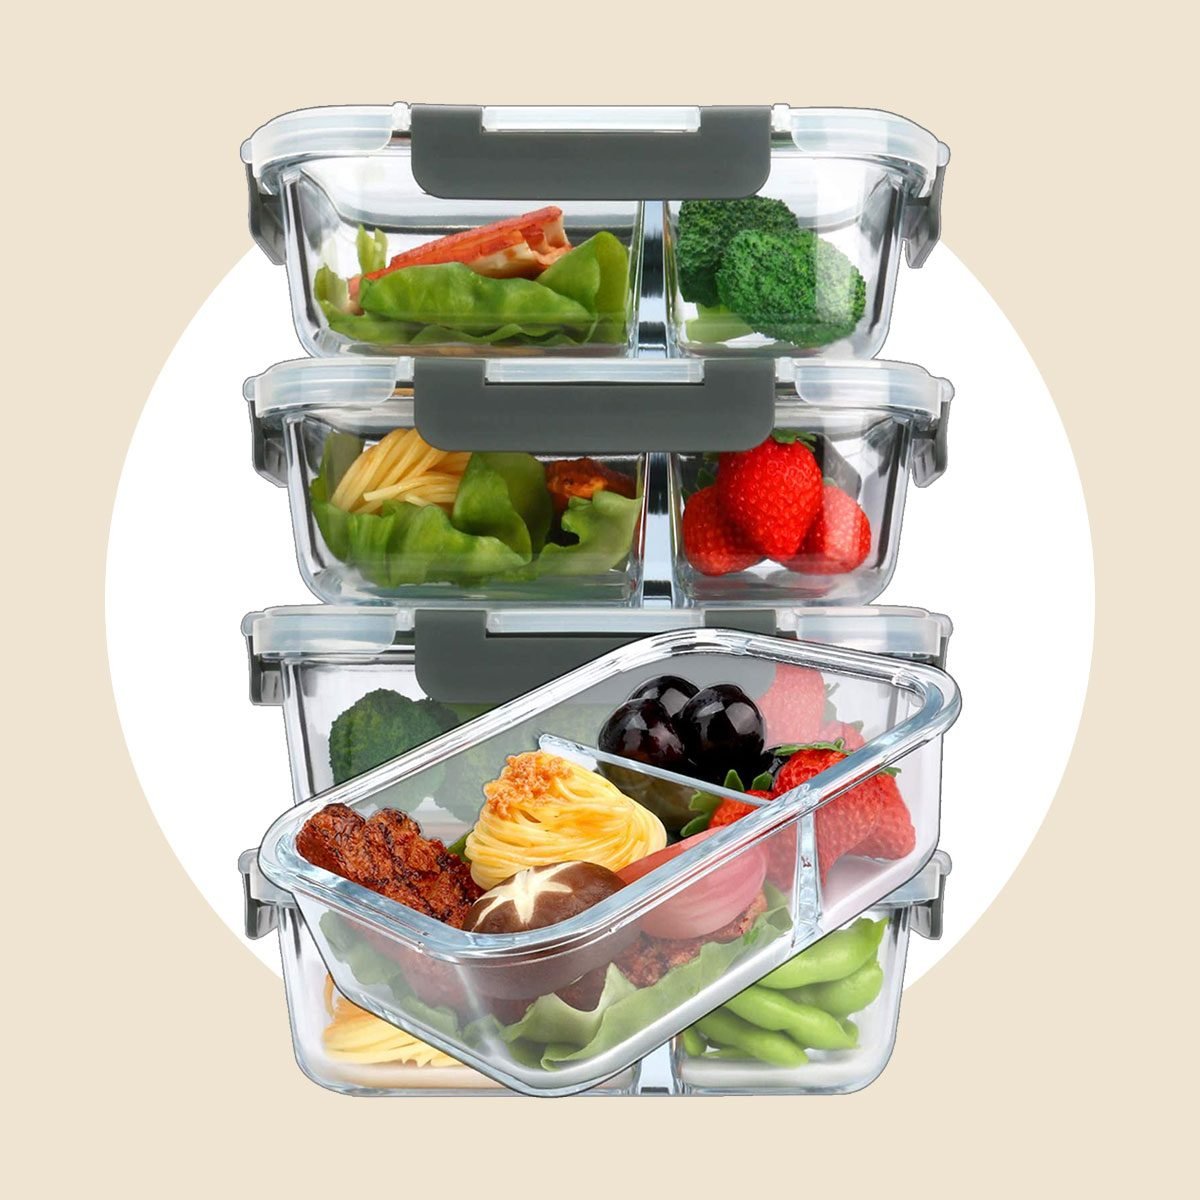 https://www.tasteofhome.com/wp-content/uploads/2021/04/M-MCIRCO-5-Pack-36-Oz-Glass-Meal-Prep-Containers-2-Compartments_ecomm_via-amazon.com_.jpg?fit=700%2C700